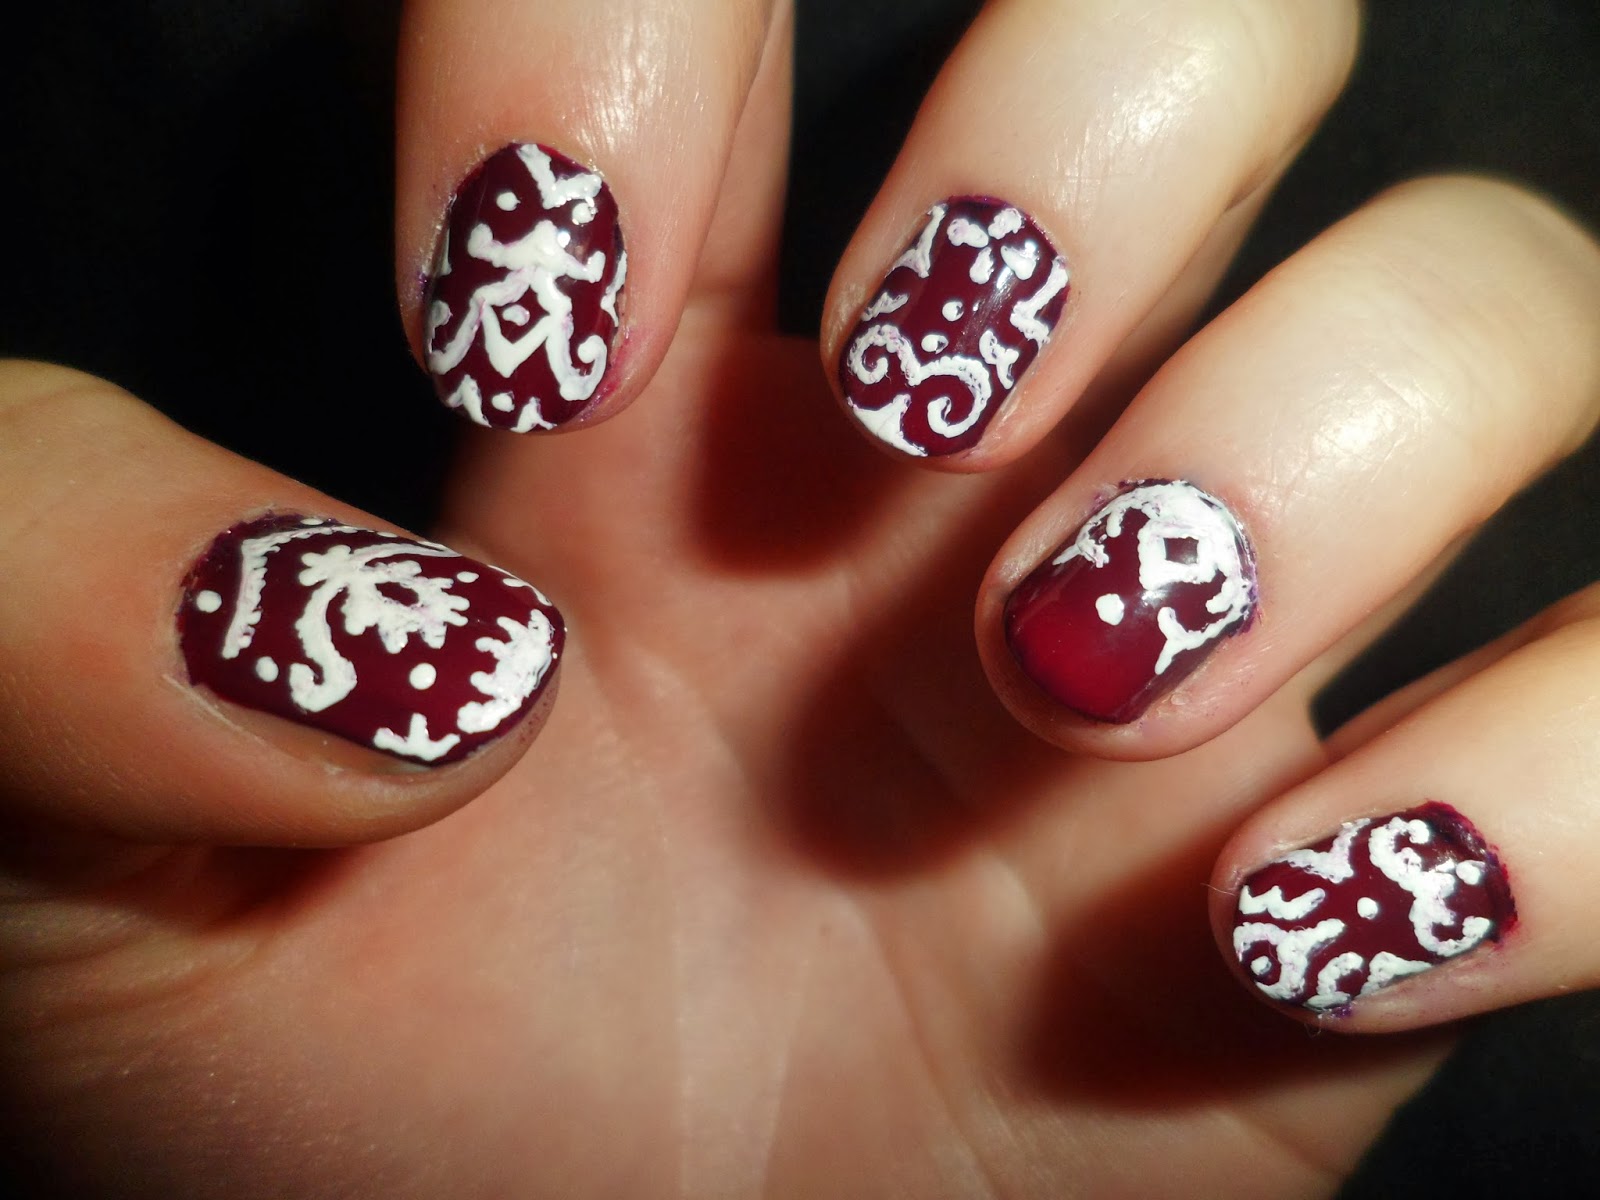 8. Burgundy and Floral Nail Art - wide 7